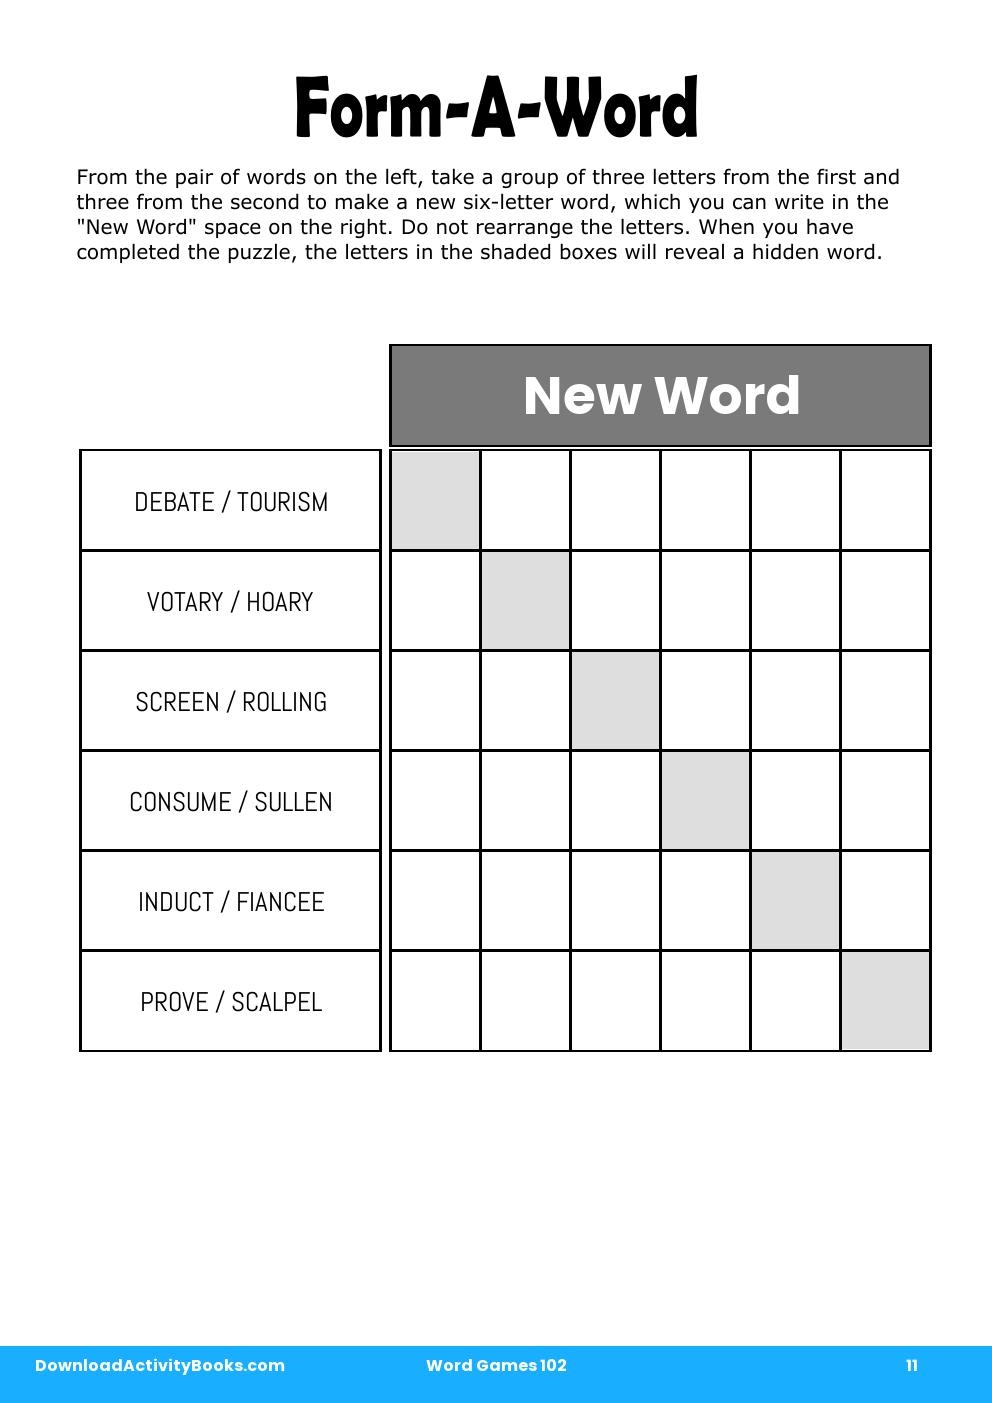 Form-A-Word in Word Games 102